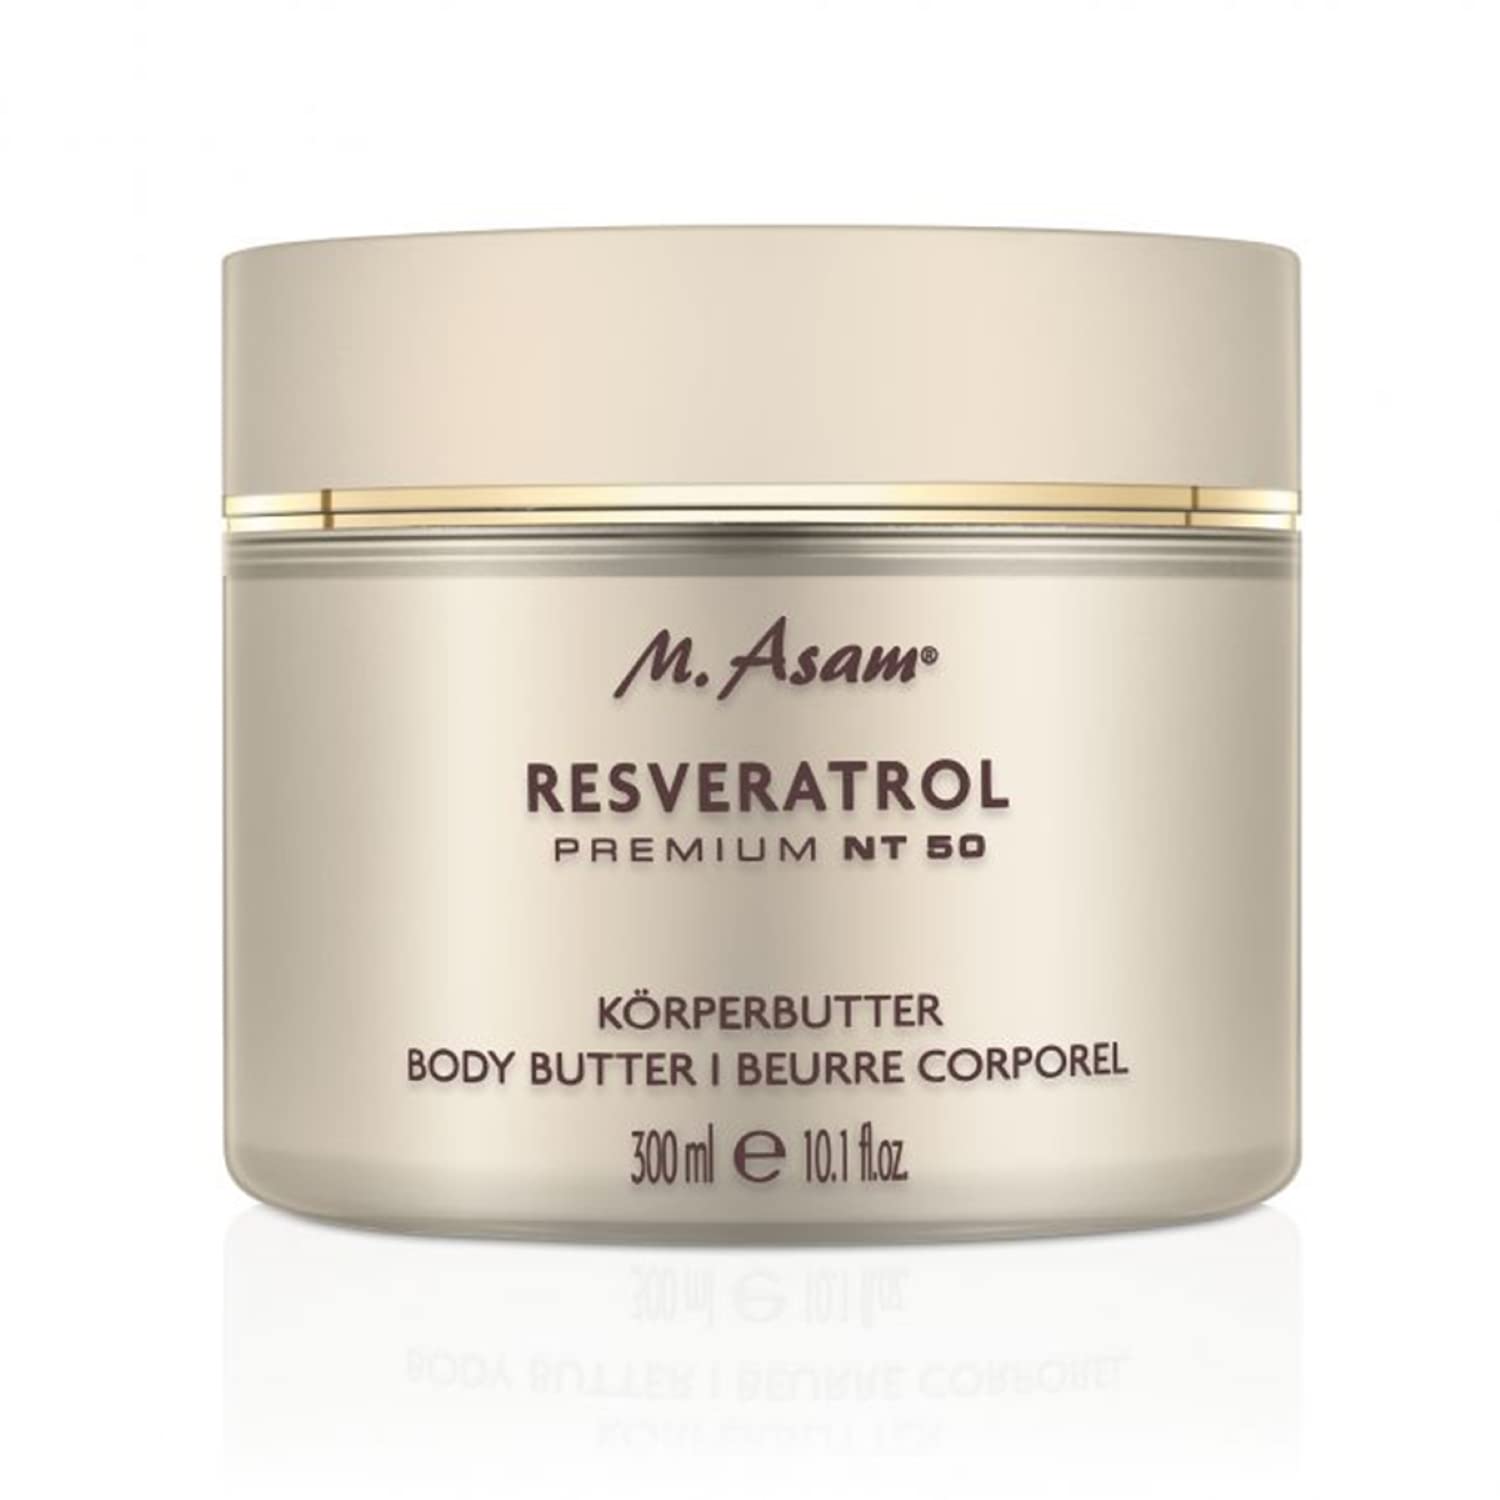 M. Asam Resveratrol Premium NT50 Body Butter – Anti-aging Body Cream strengthens the skin’s protective barrier - Moisturizer for a firm & smooth appearance, 10.1 Fl Oz